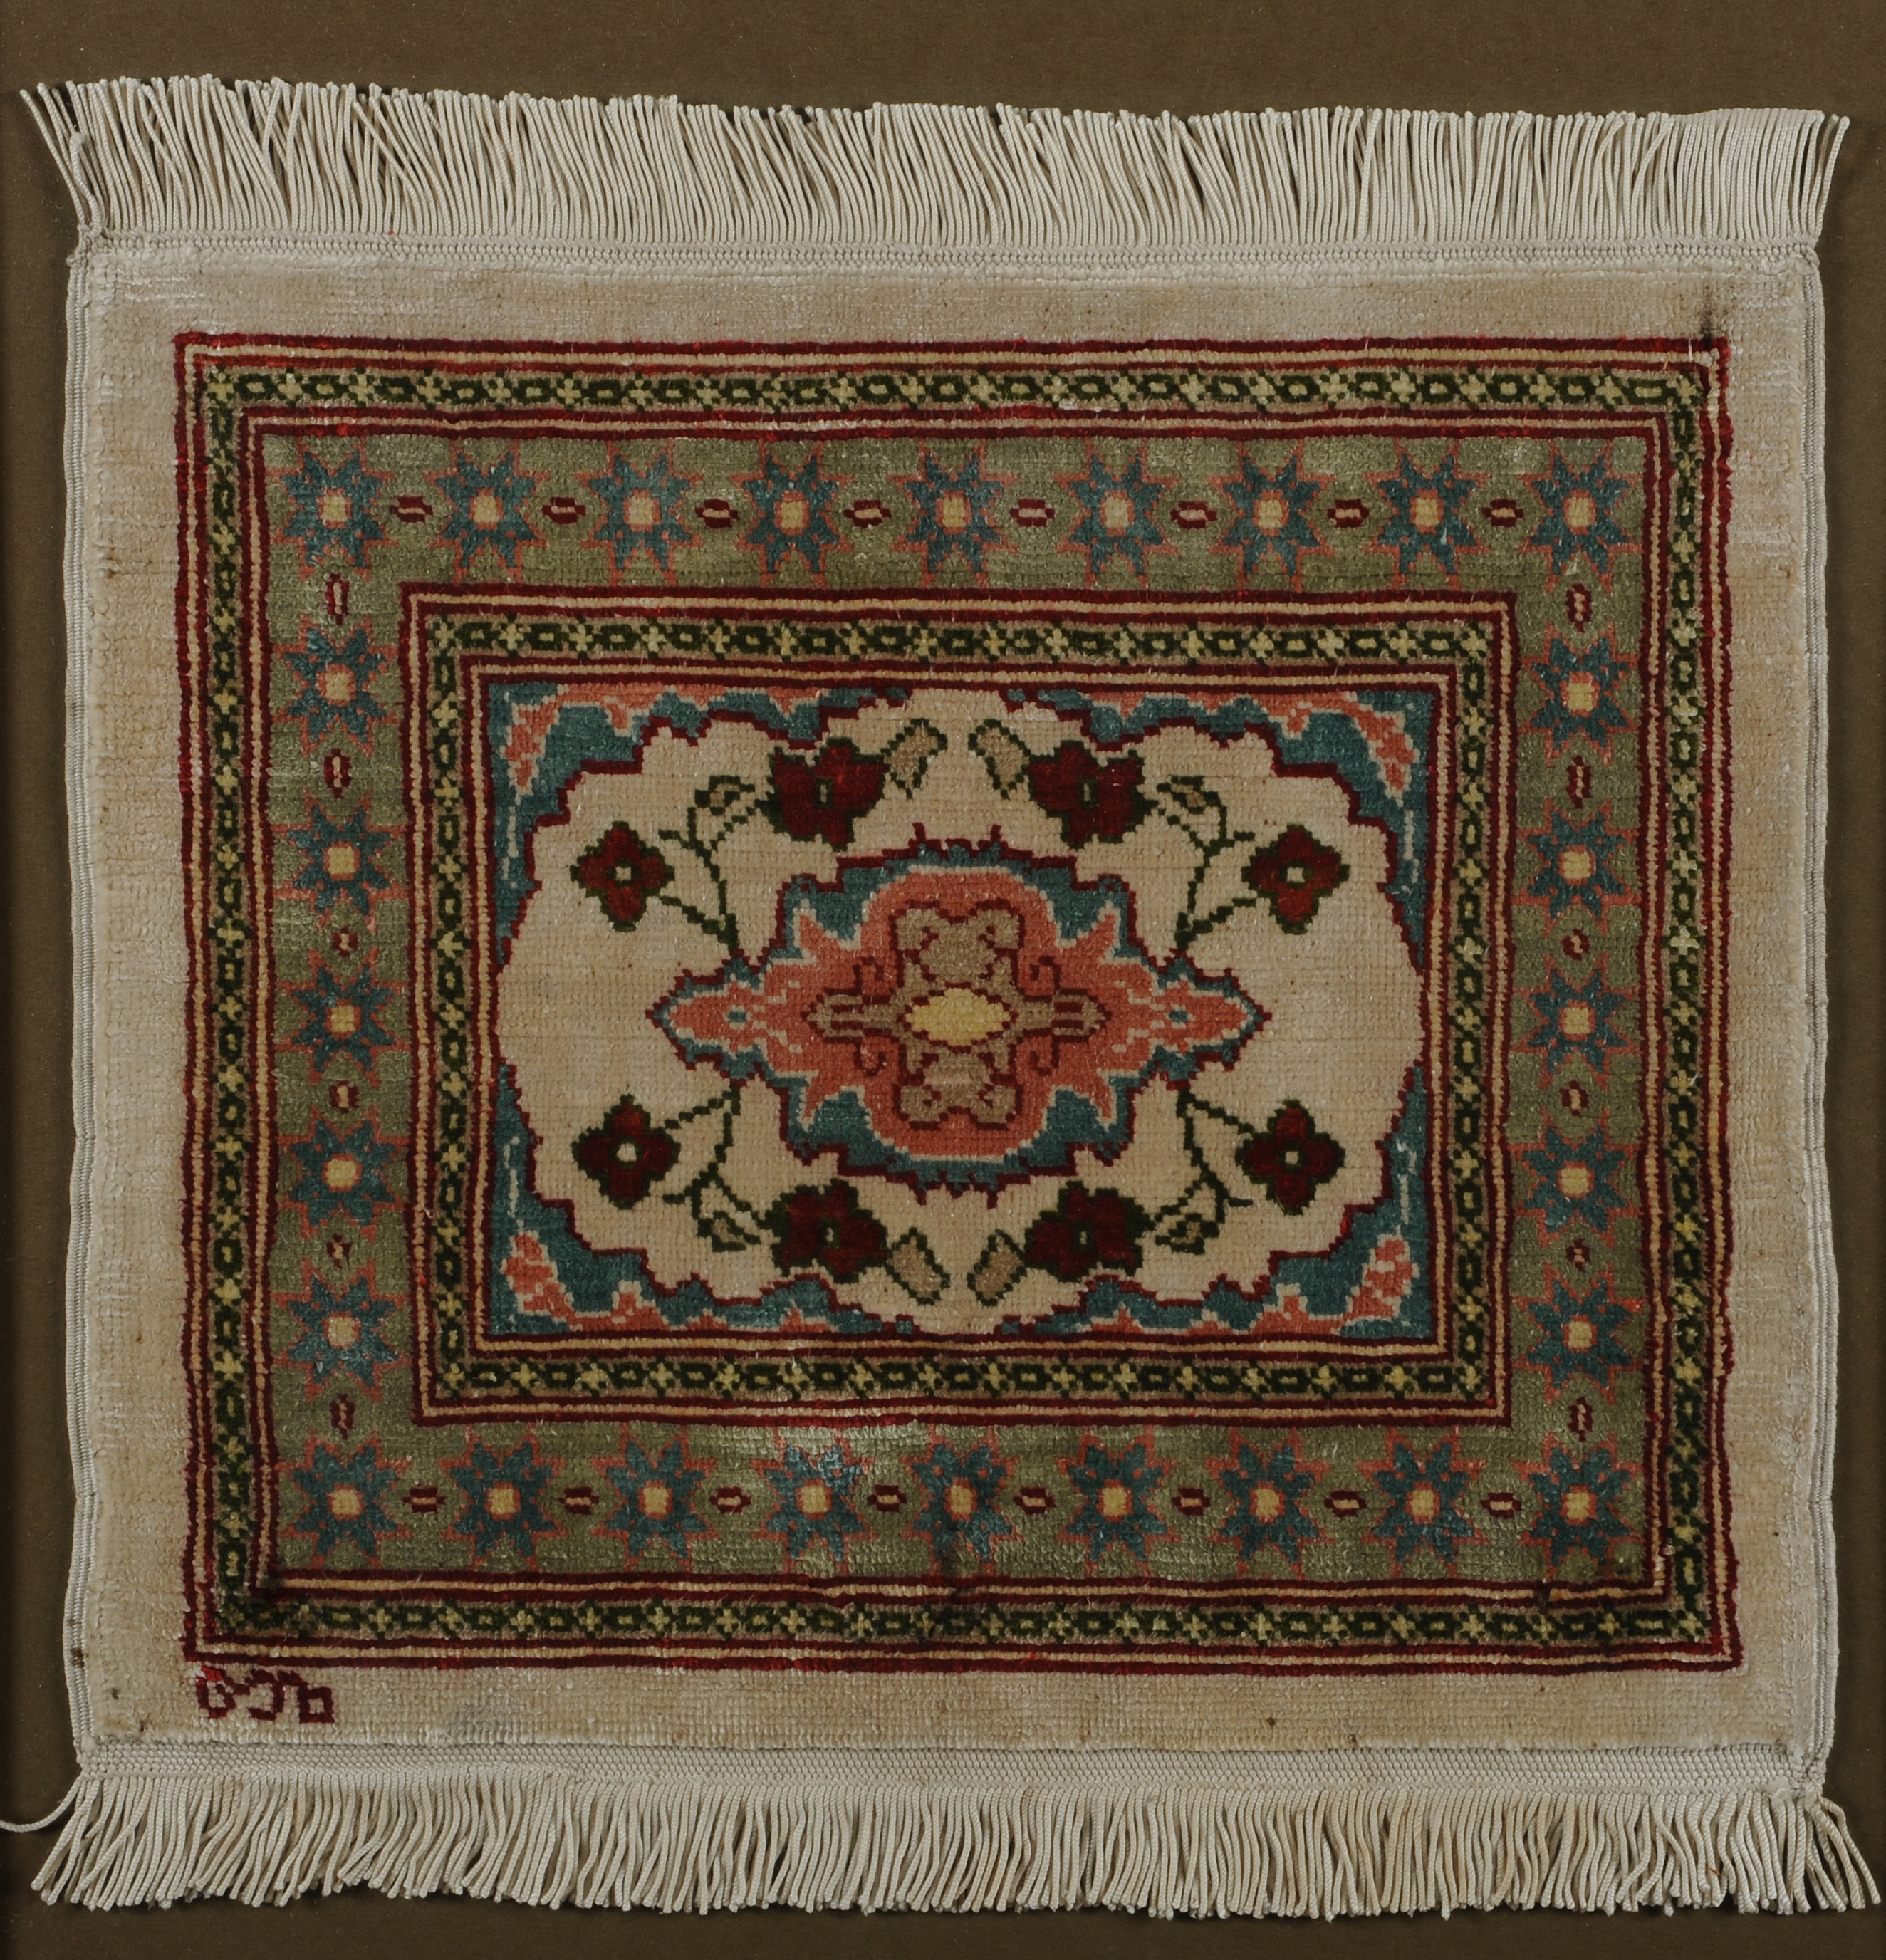 A CAUCASIAN MINIATURE SILK RUG, with a central floral medallion with corner spandrels on a cream